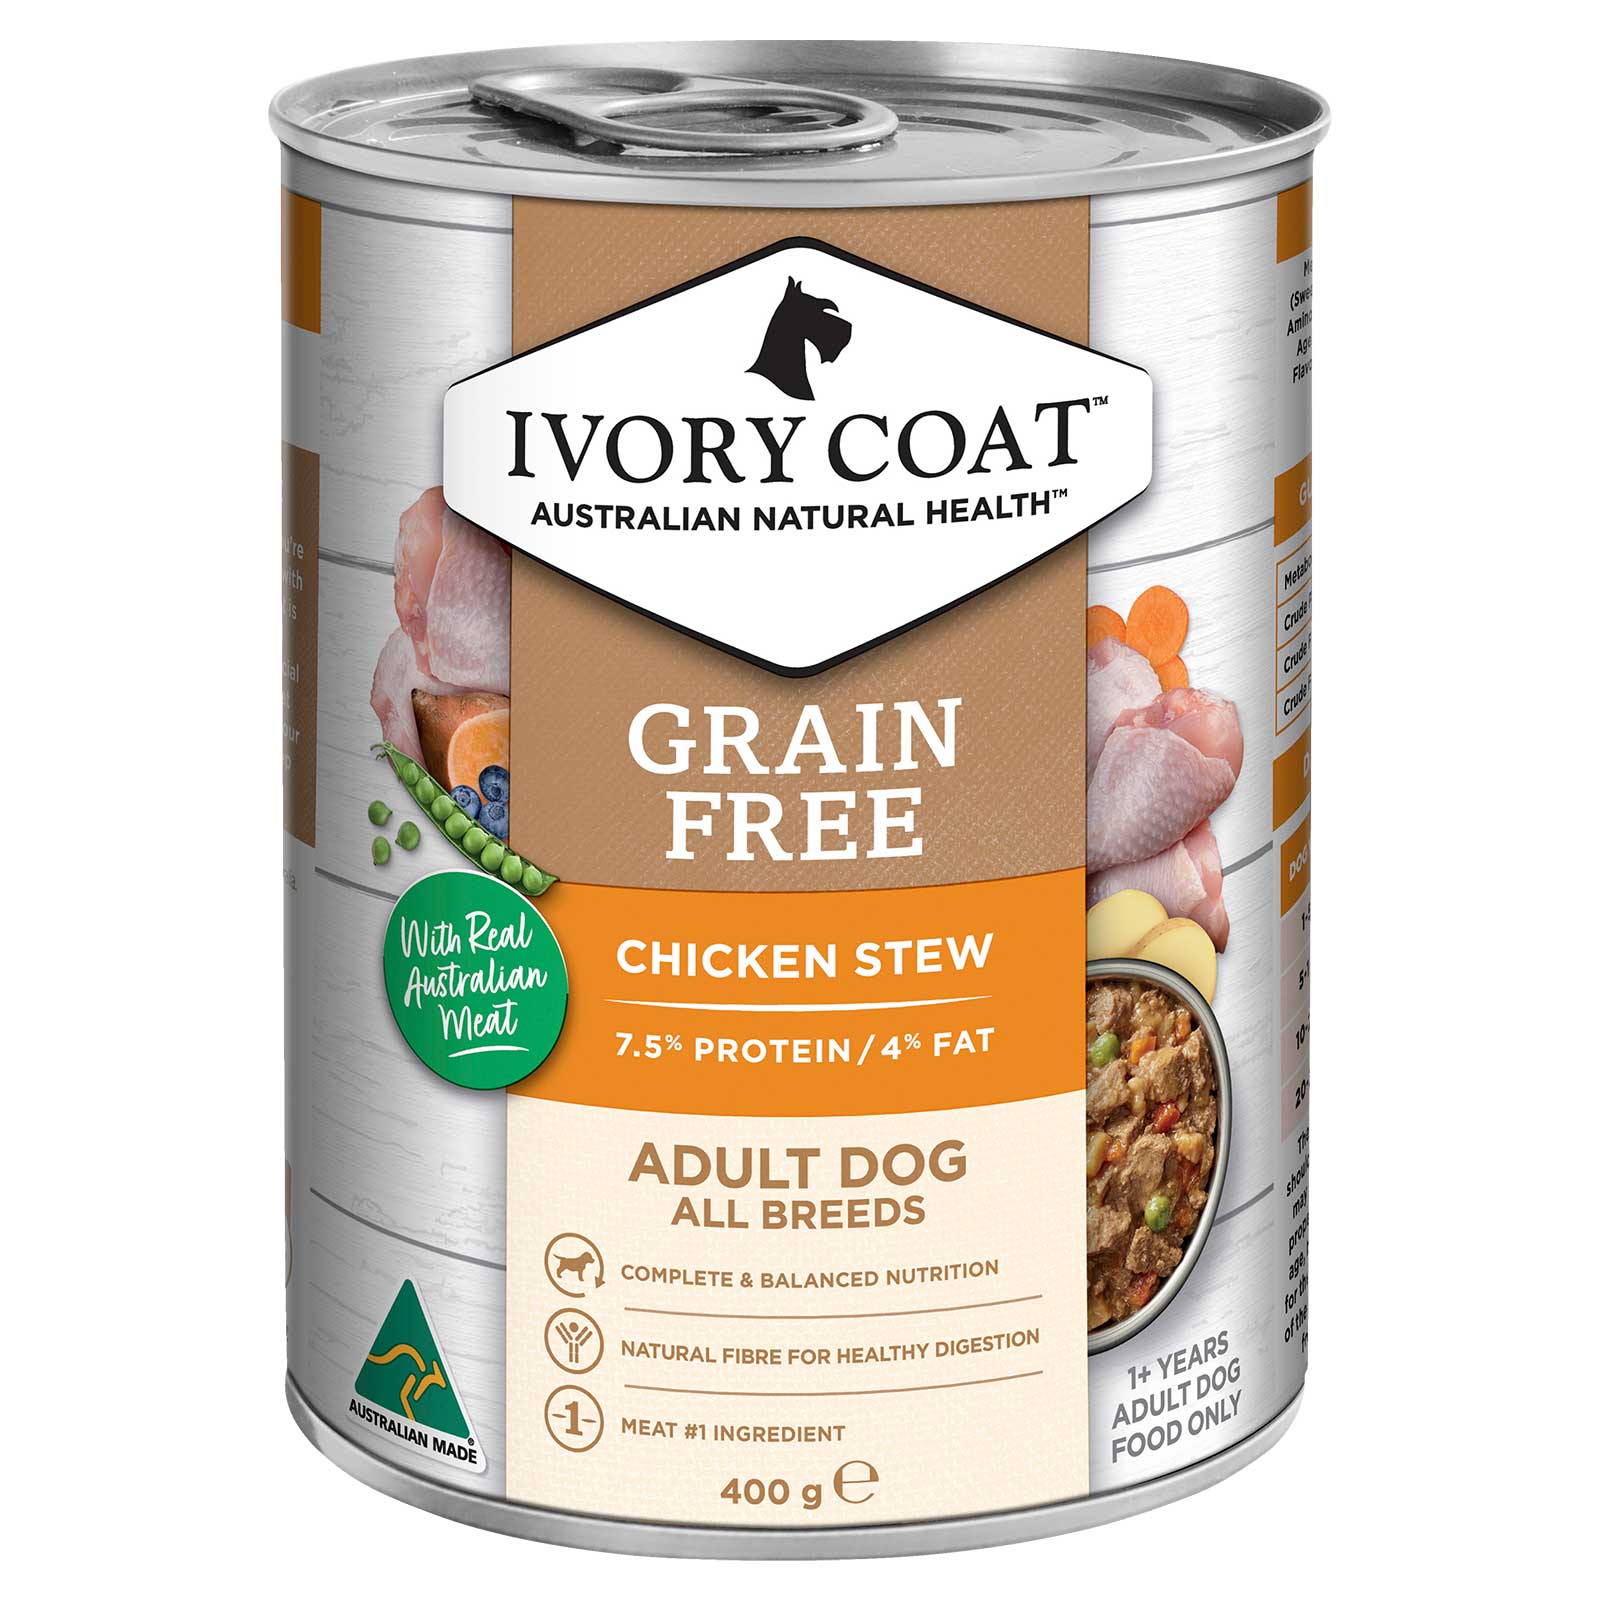 Ivory Coat Grain Free Dog Food Can Adult Chicken Stew